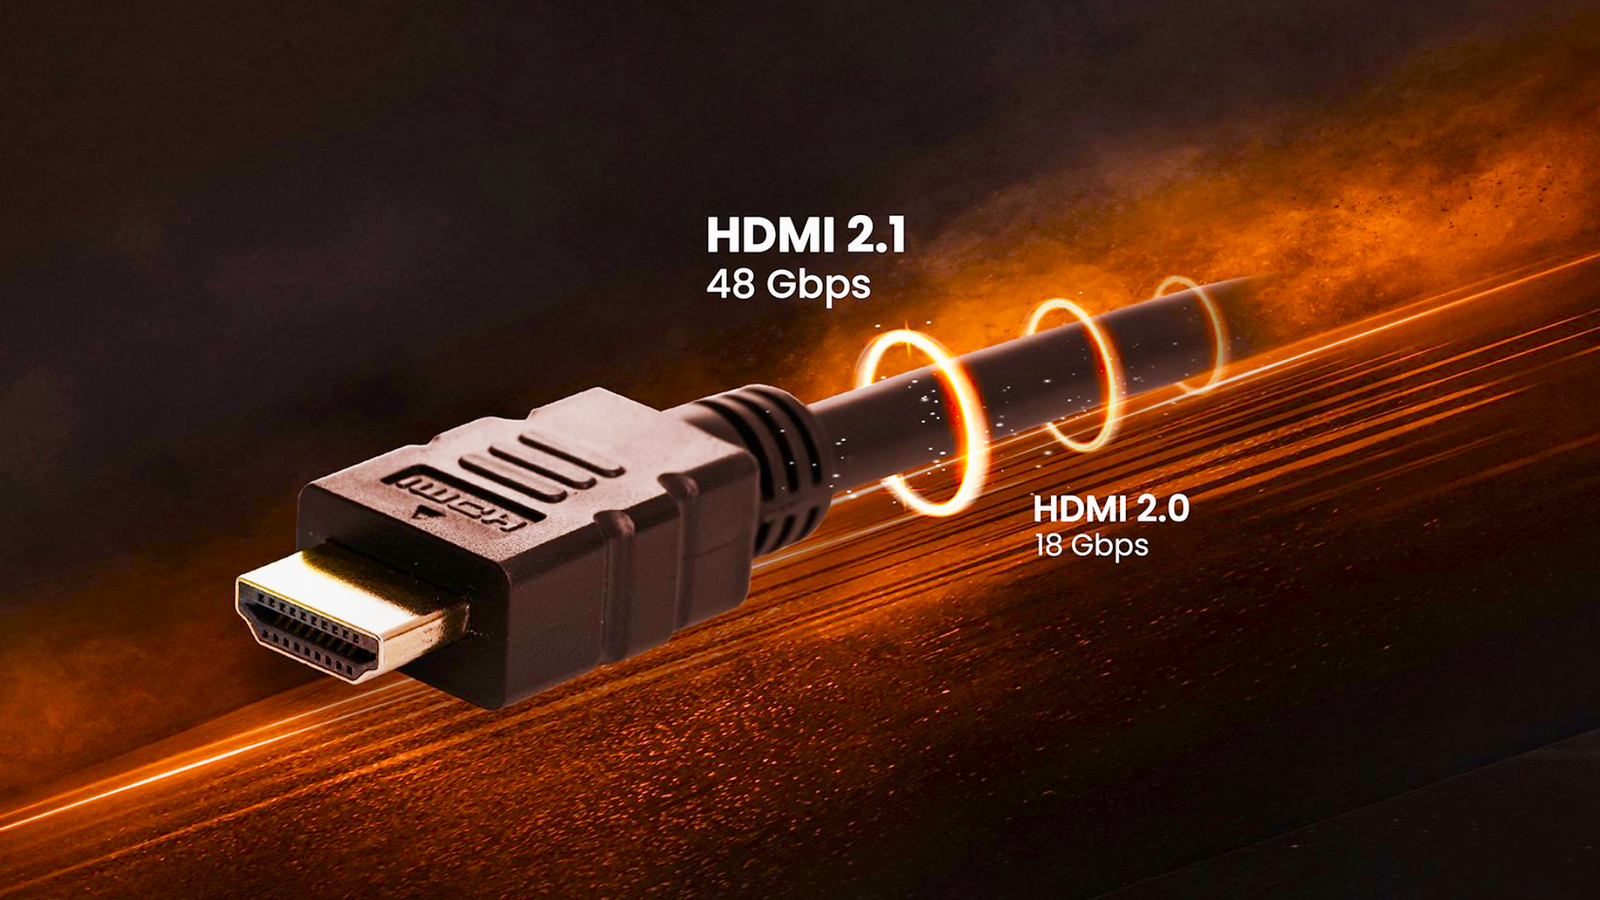 A picture of an HDMI cable that shows the HDMI 2.0 vs HDMI 2.1 comparison when it comes to bandwidth